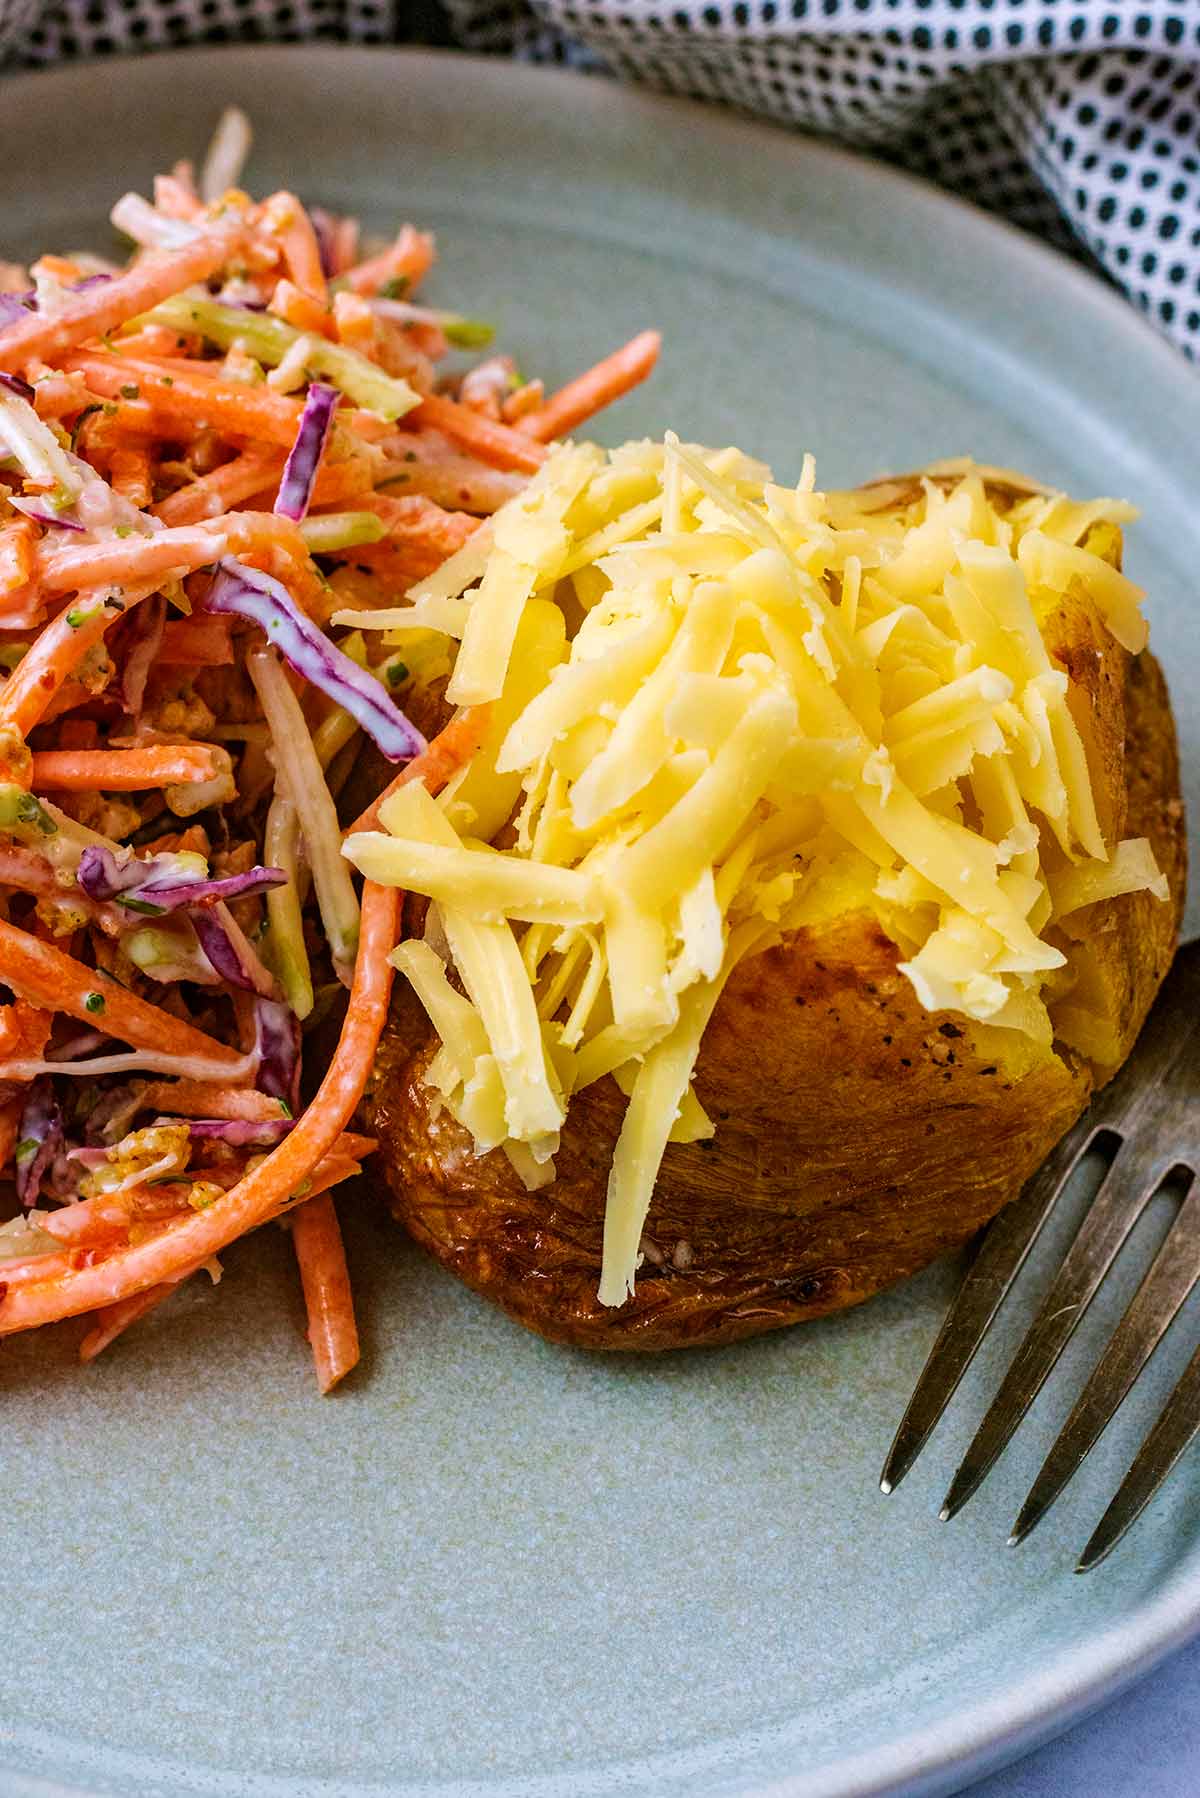 A cheese topped jacket potato on a plate next to some coleslaw.